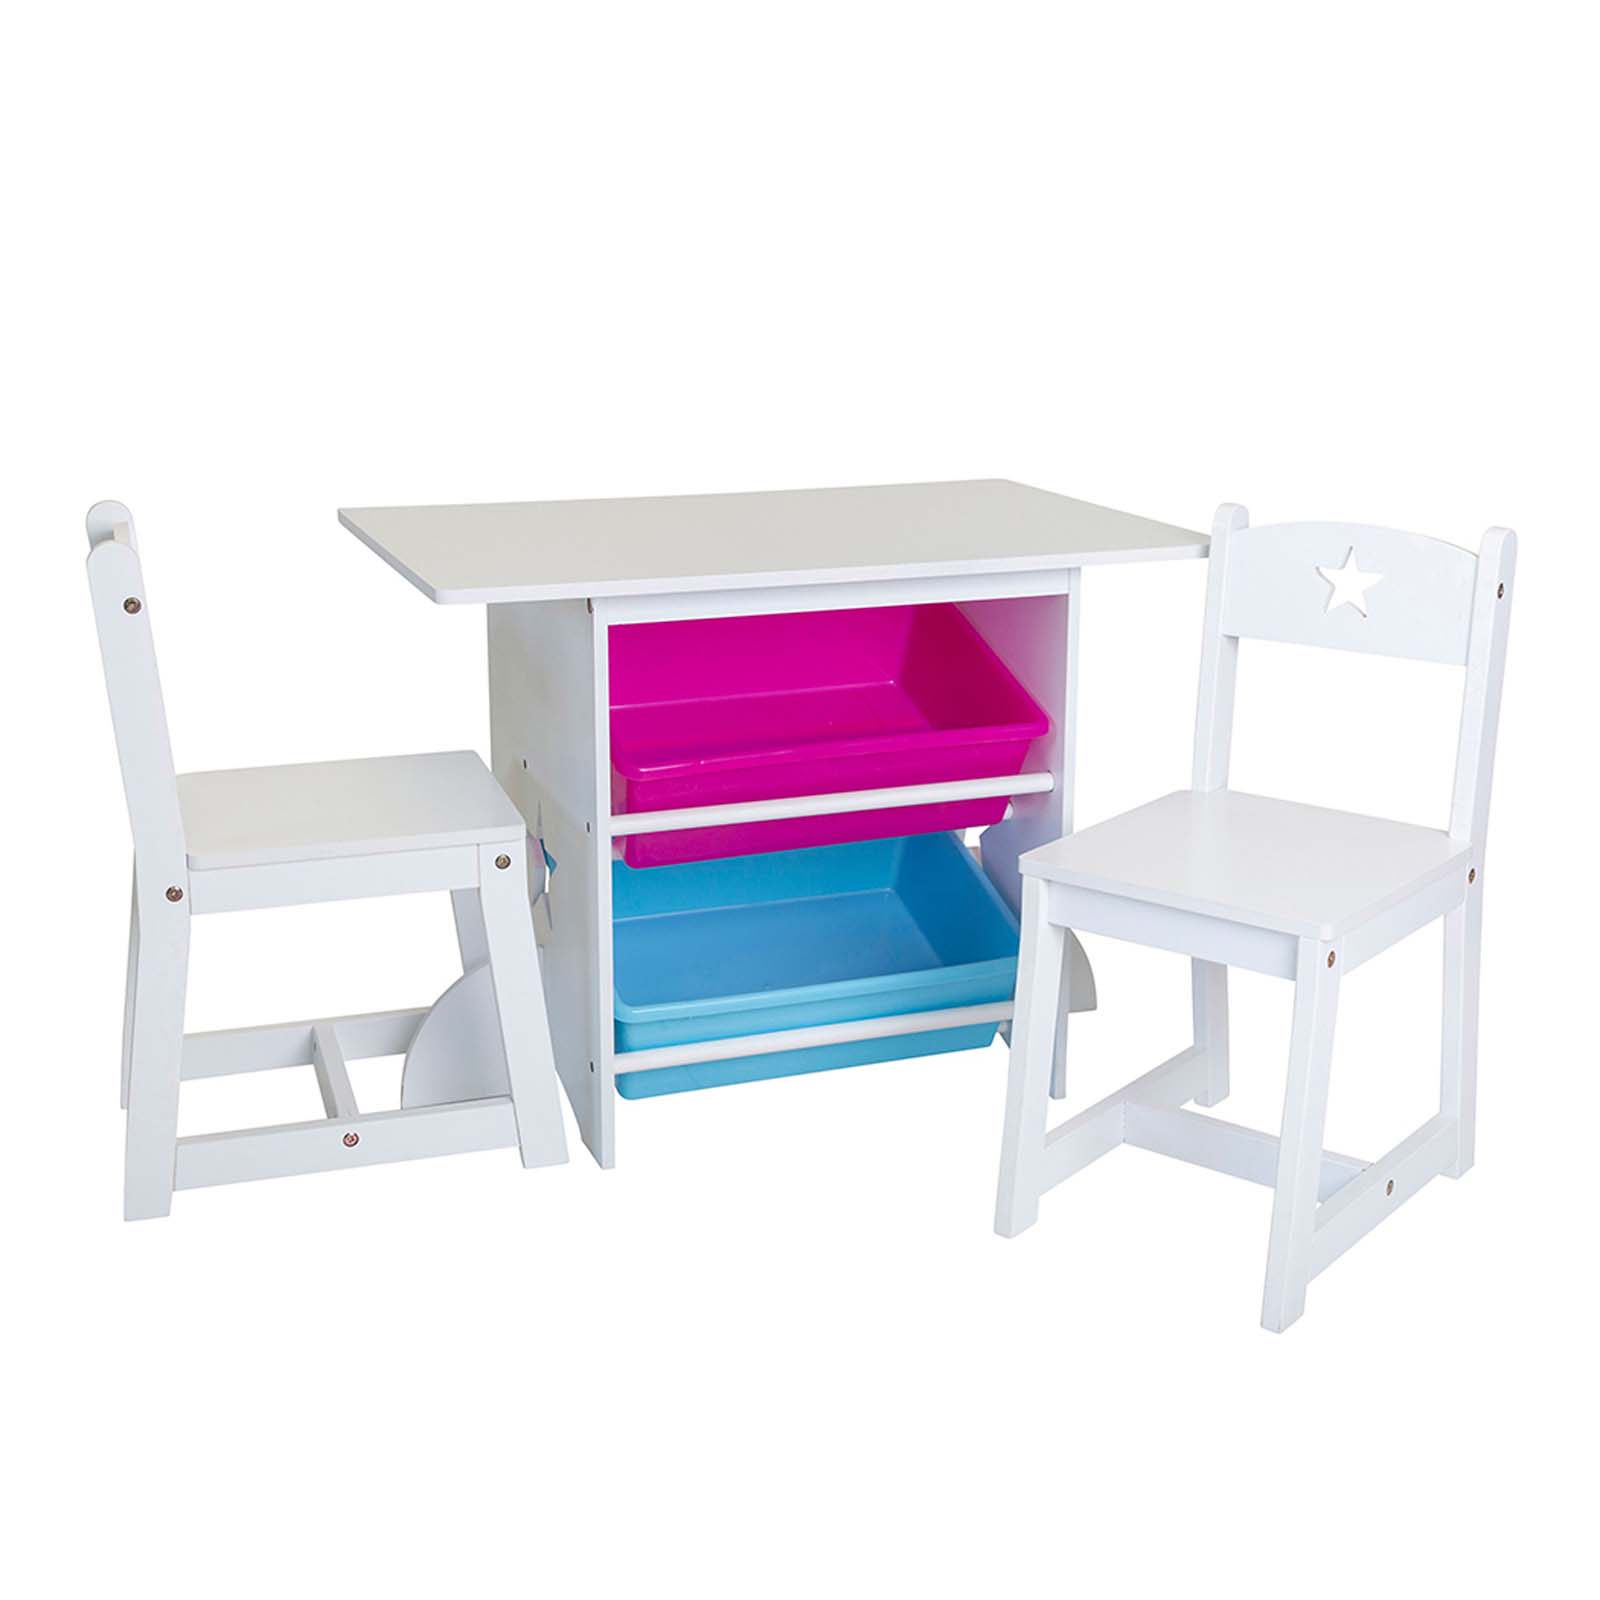 Mia Kids Table and Chair Set with Large Storage Bins